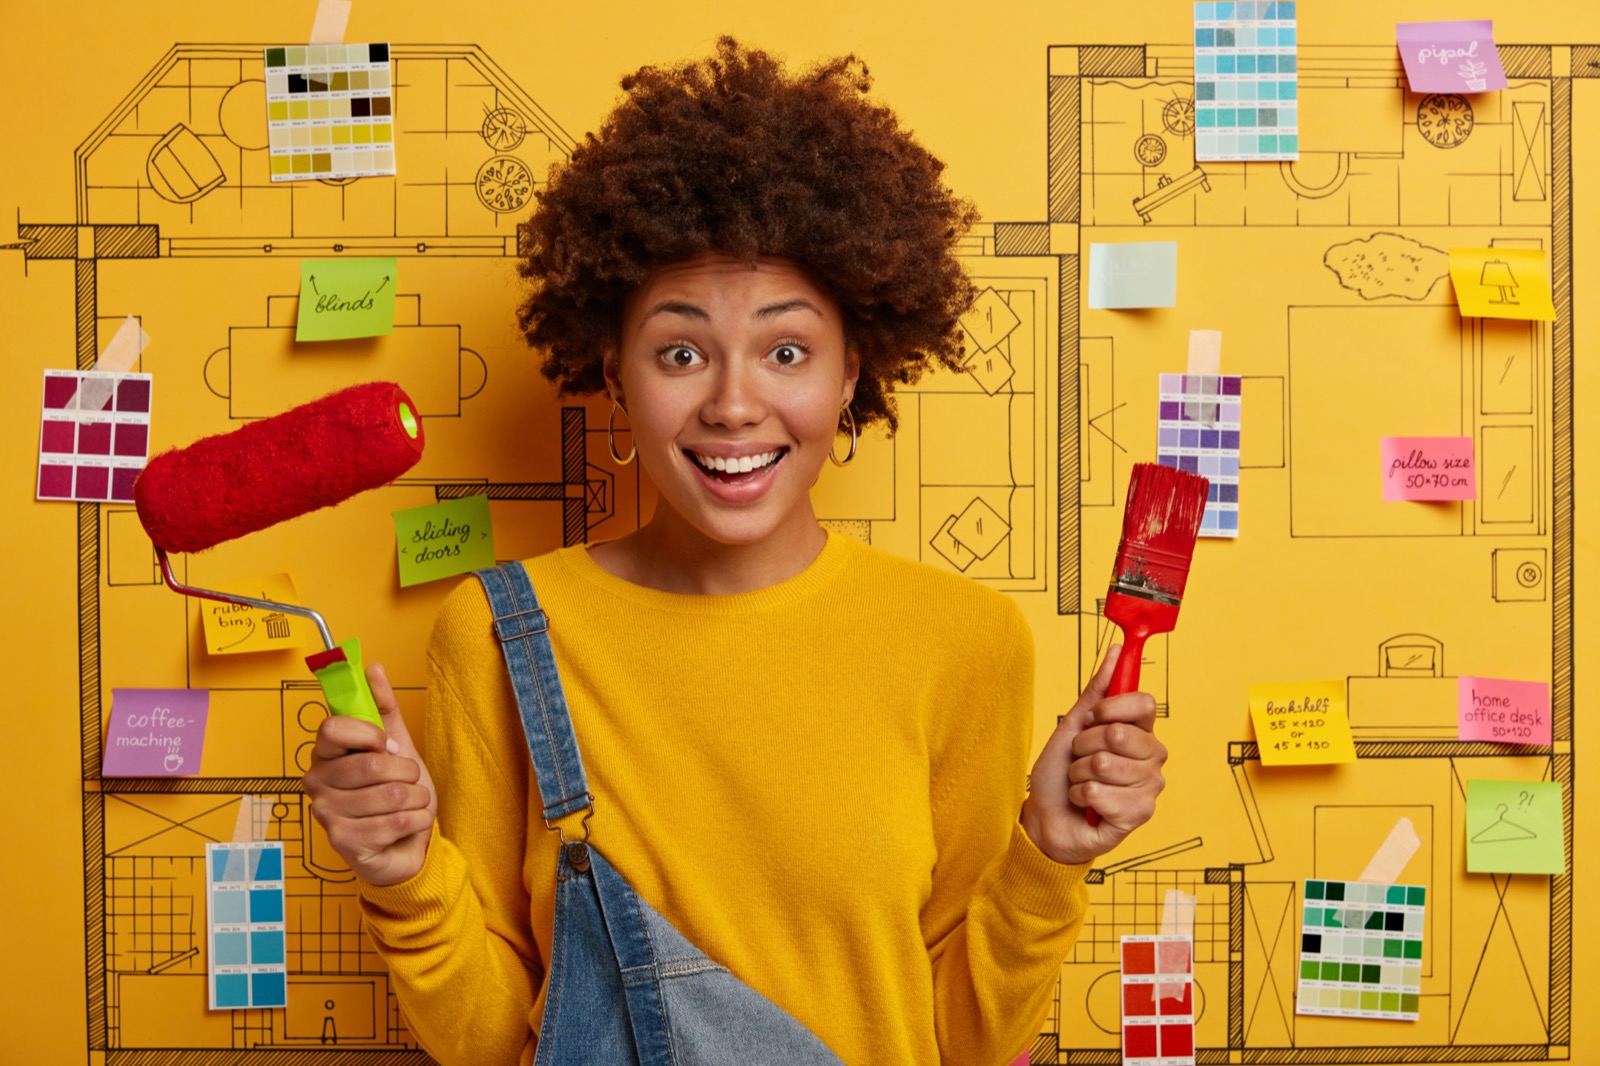 This Quiz Will Reveal Color Palette of Your Personality Creative Painter Holds Paint Roller And Brush, Does House Repairing, Dressed In Yellow Jumper And Overalls, Stands Against House Sketch With Color Samples, Sticky Notes. Renovation